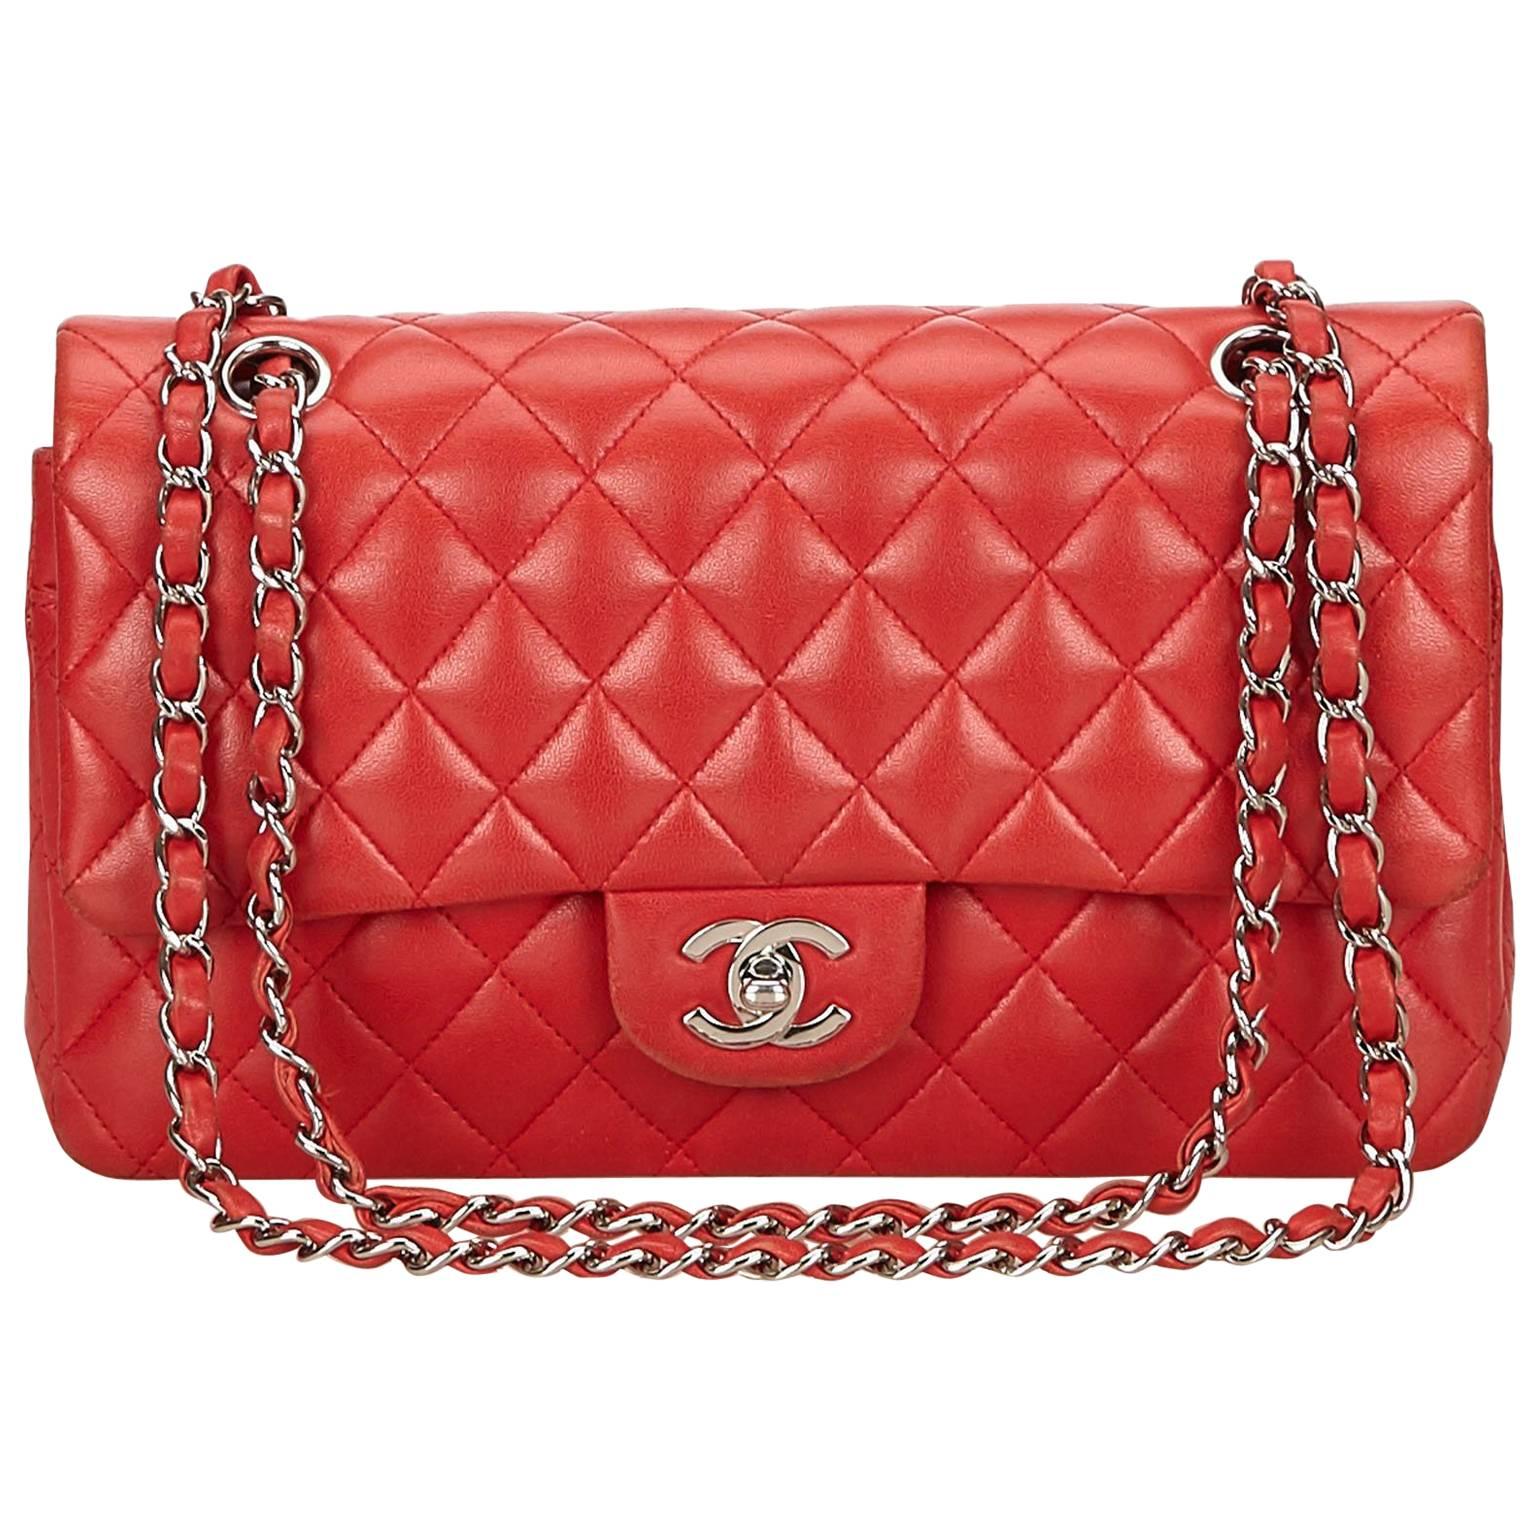 Chanel Classic Medium Red Lambskin Leather Double Flap Bag 